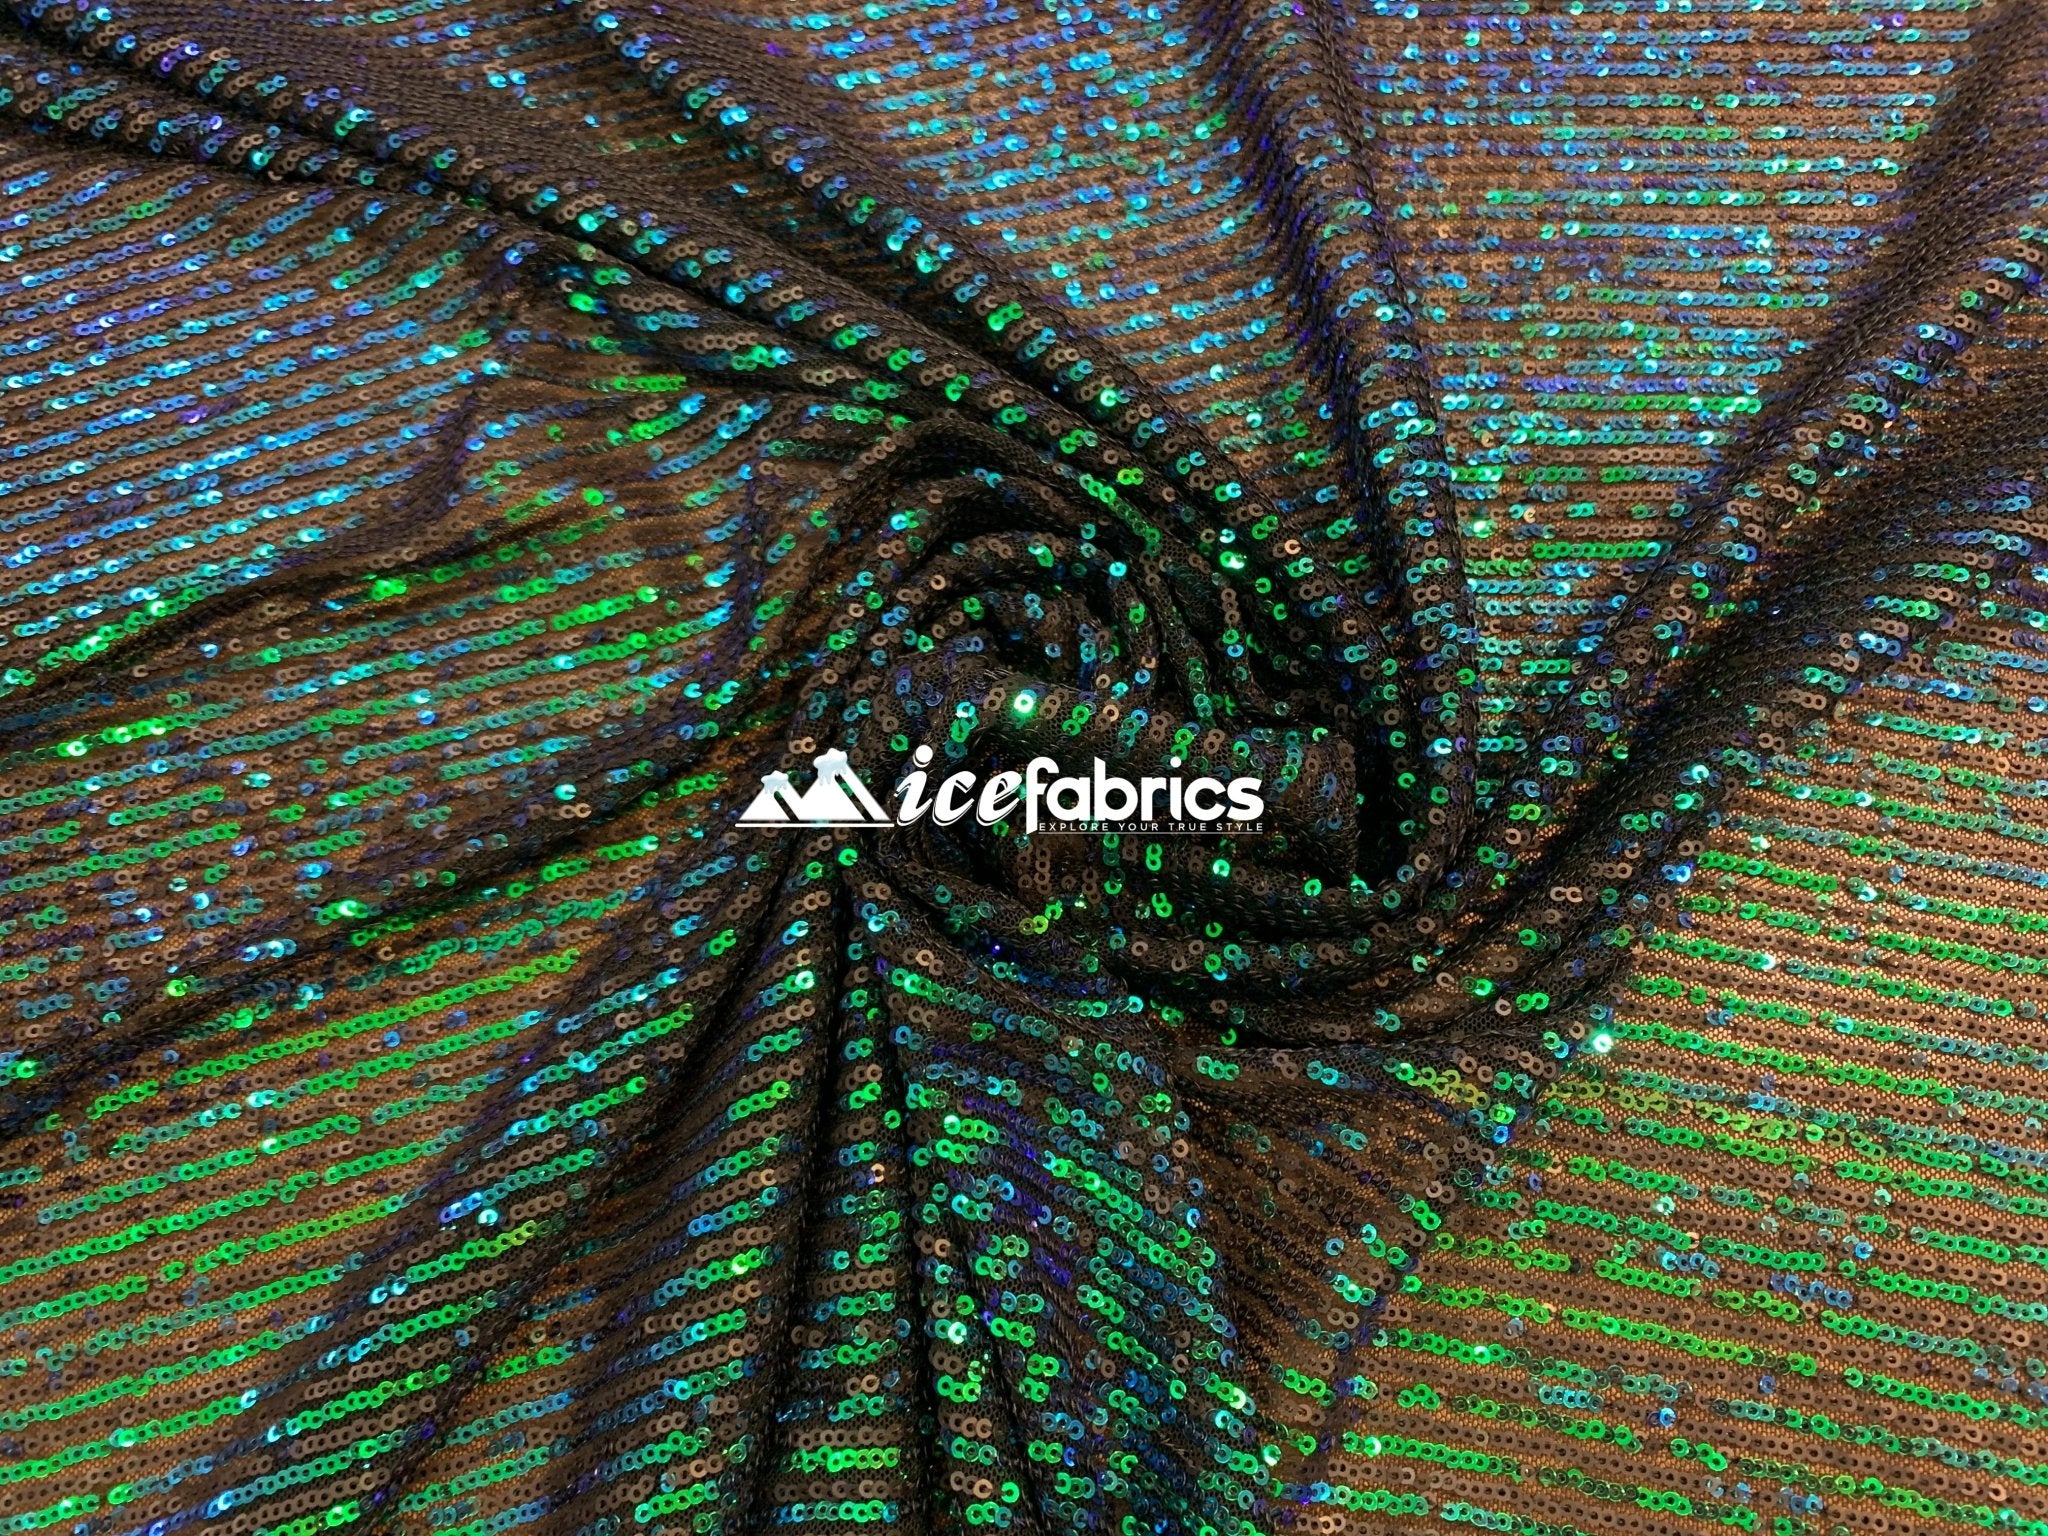 Iridescent Sequin 2 Way Mesh Stretch Sequins Fabric By The YardICEFABRICICE FABRICSGreen IridescentIridescent Sequin 2 Way Mesh Stretch Sequins Fabric By The Yard ICEFABRIC Green Iridescent